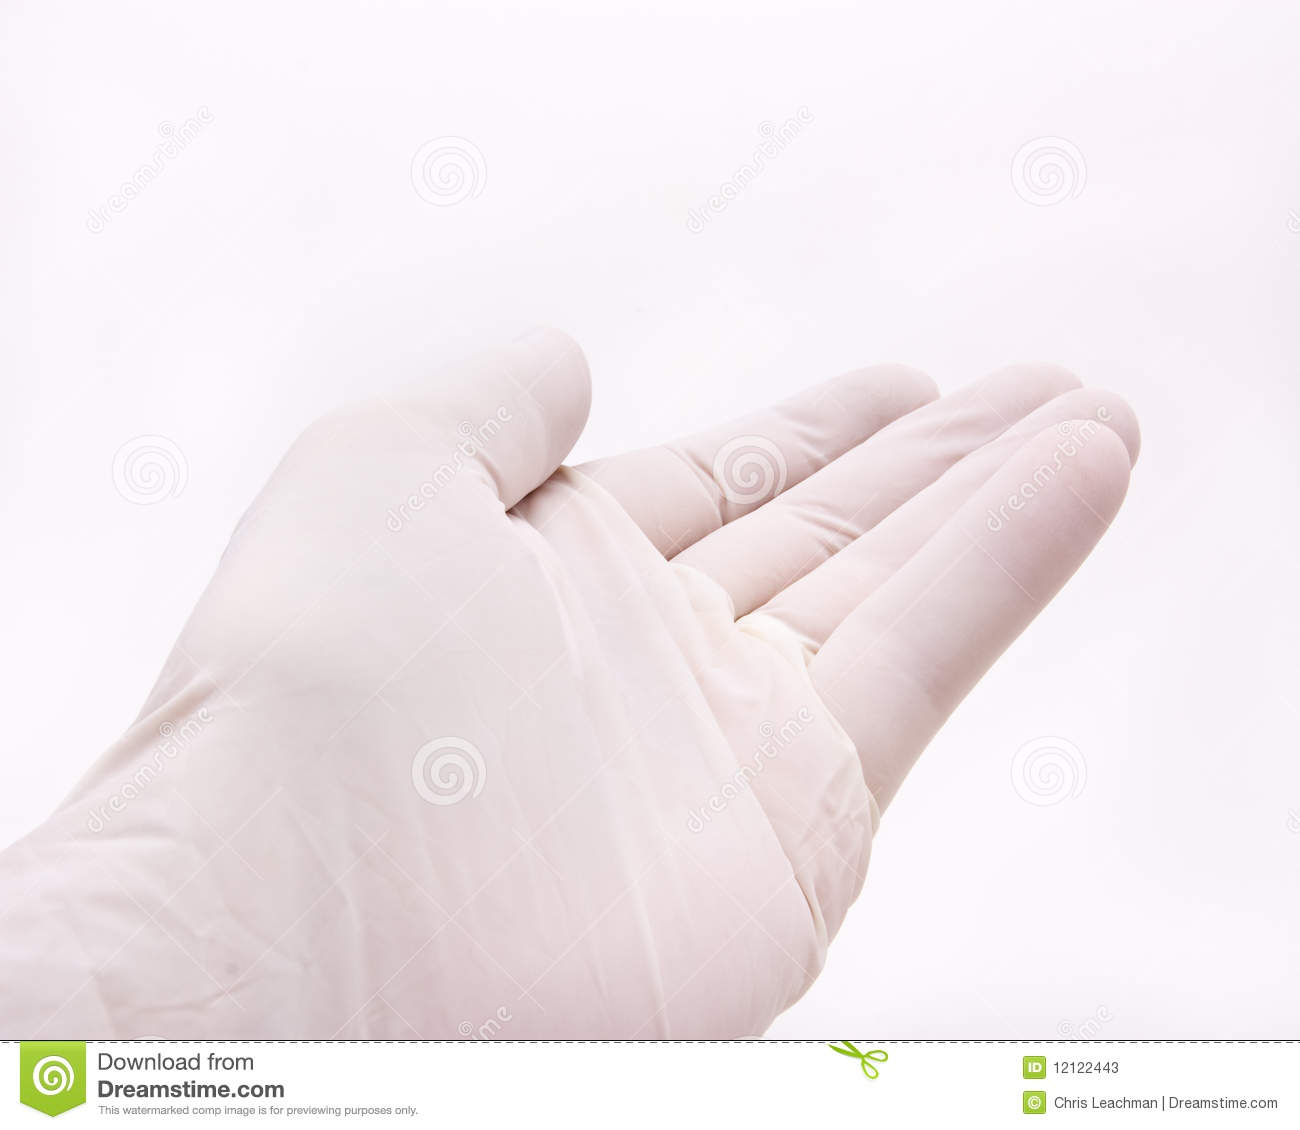 Gloved Hand Gesture Stock Photos   Image  12122443